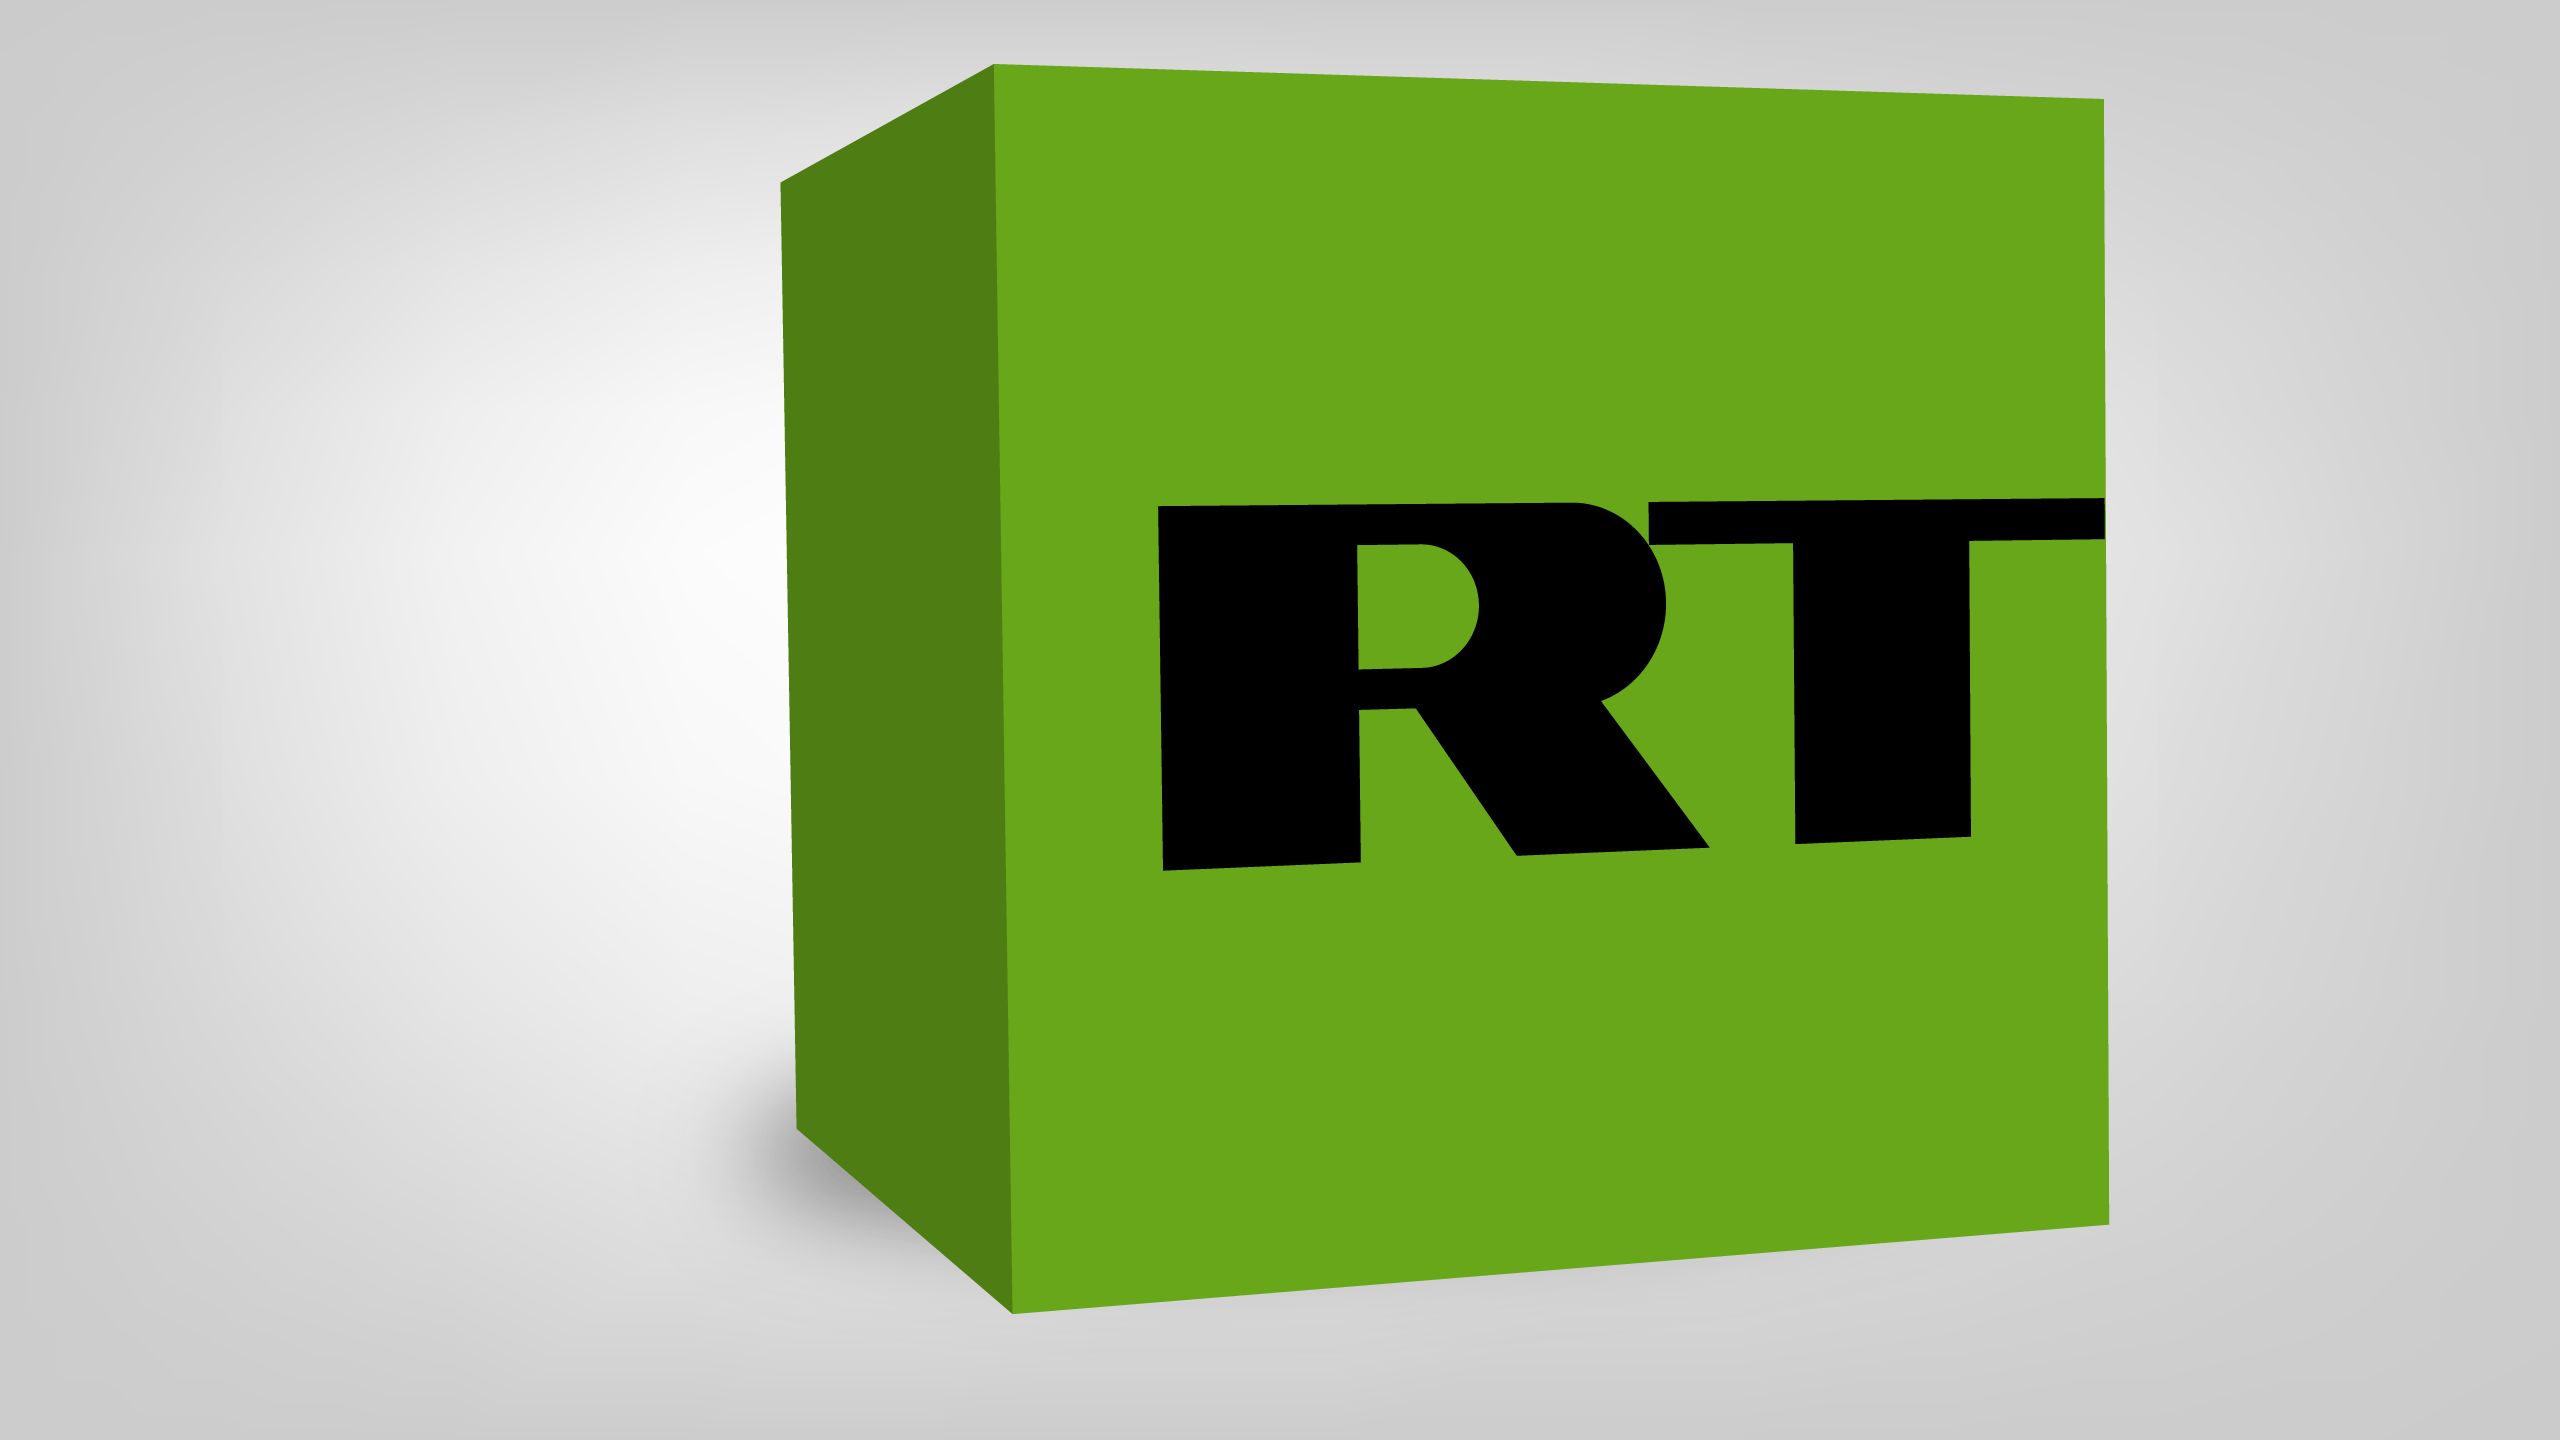 Unblocked Logo - Russia Backed RT Unblocked On Facebook, Claims Dataminr Also Revoked